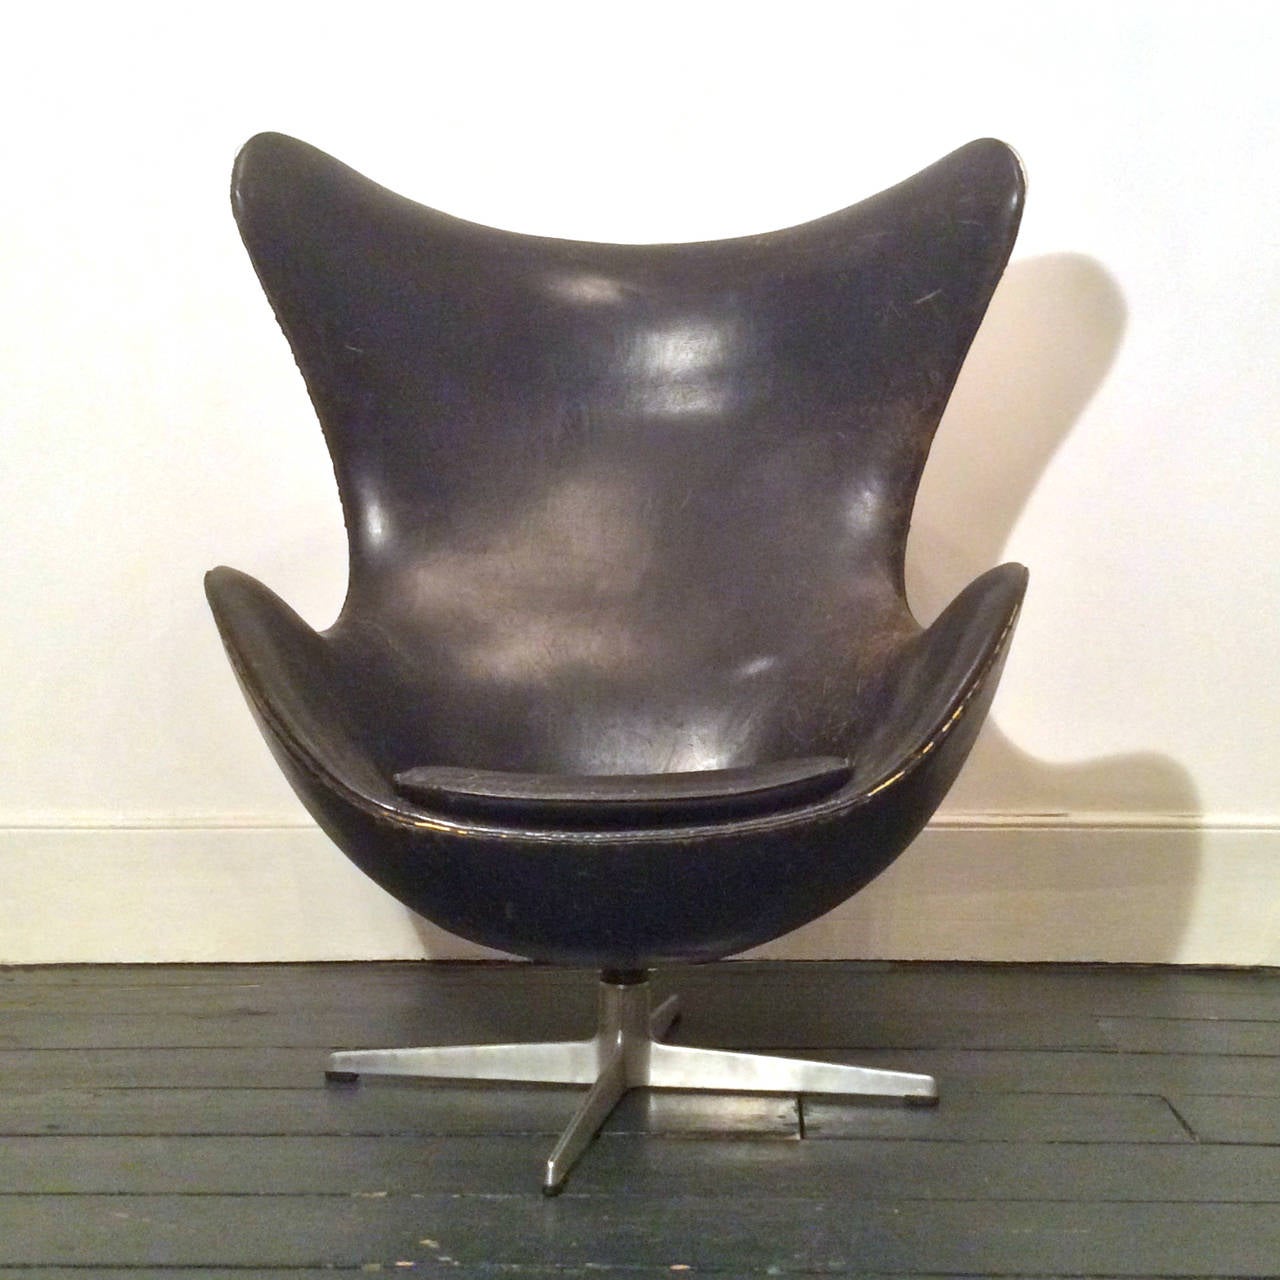 Early egg chair by Arne Jacobsen for Fritz Hansen.  Denmark, 1960s.

A beautiful chair with great character.  The chair is in completely original condition with lots of age related wear to the upholstery (including one small break in the leather